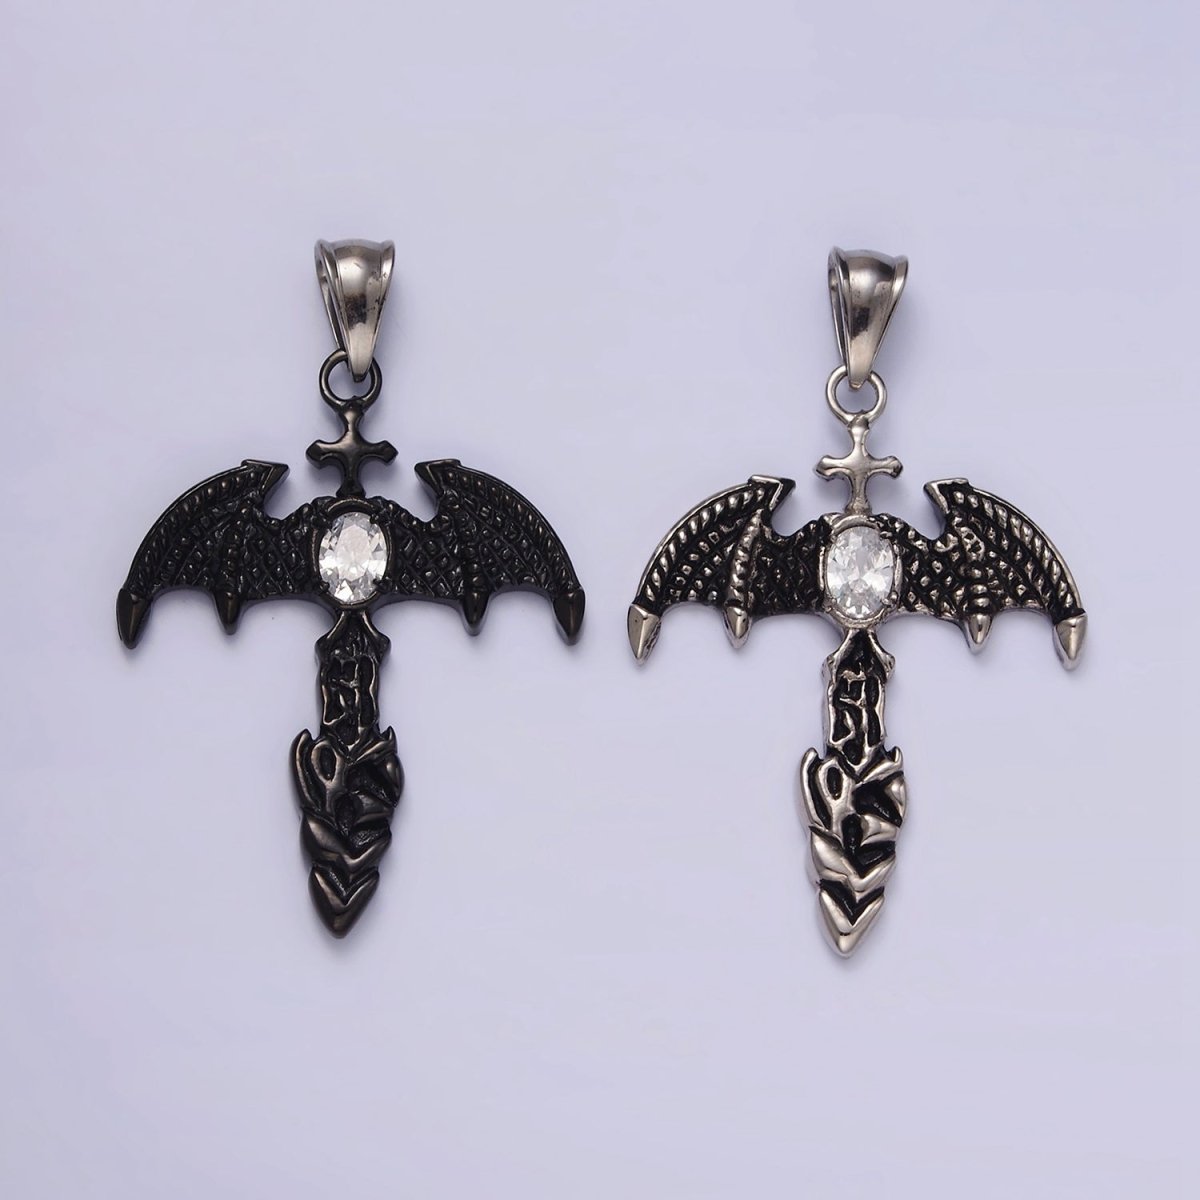 Stainless Steel 55mm Clear Oval CZ Bat Wings Passion Cross Religious Pendant in Silver & Black | P-815 P-816 - DLUXCA